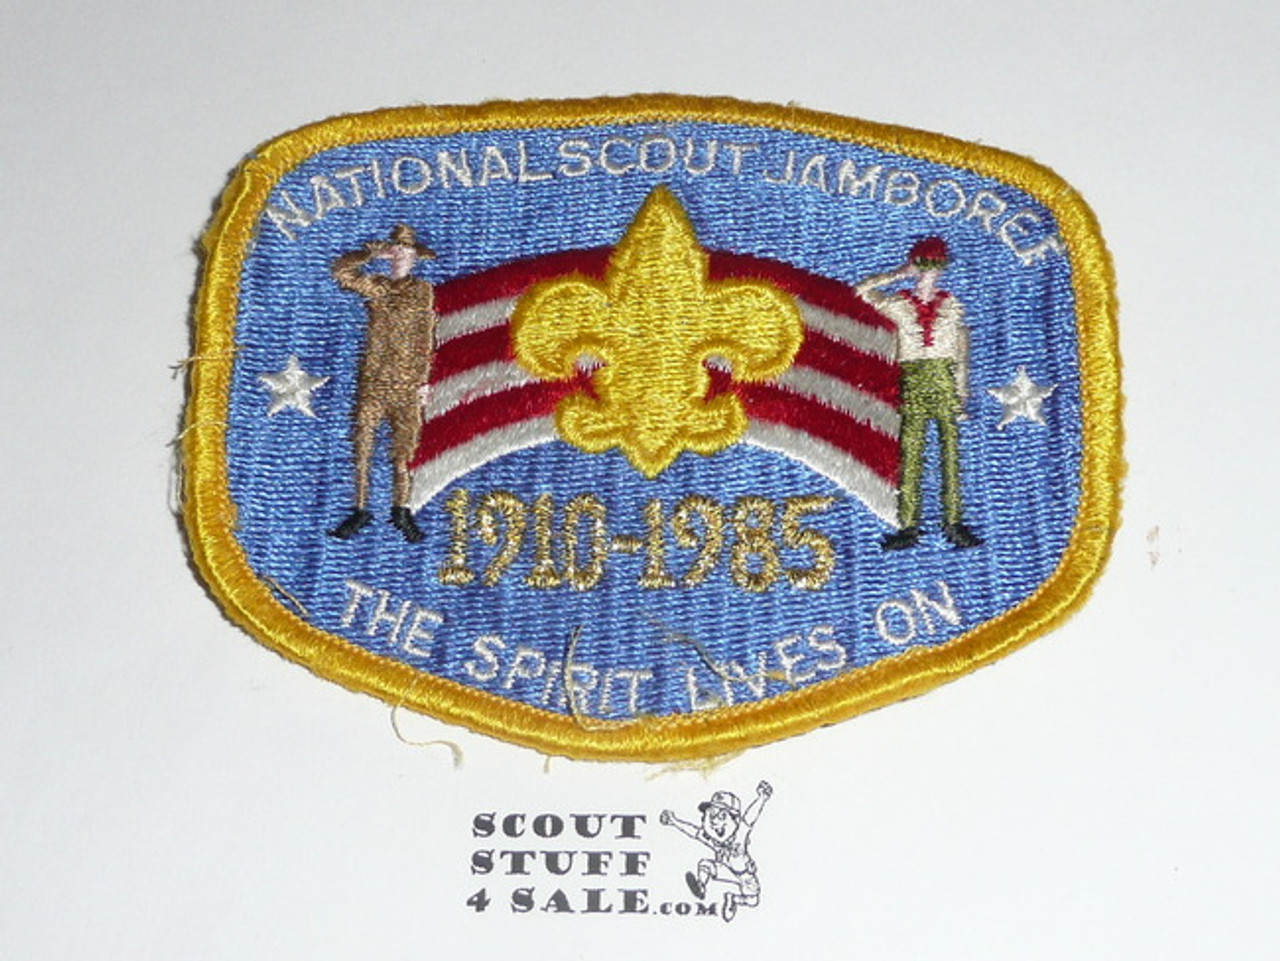 1985 National Jamboree Patch, Used